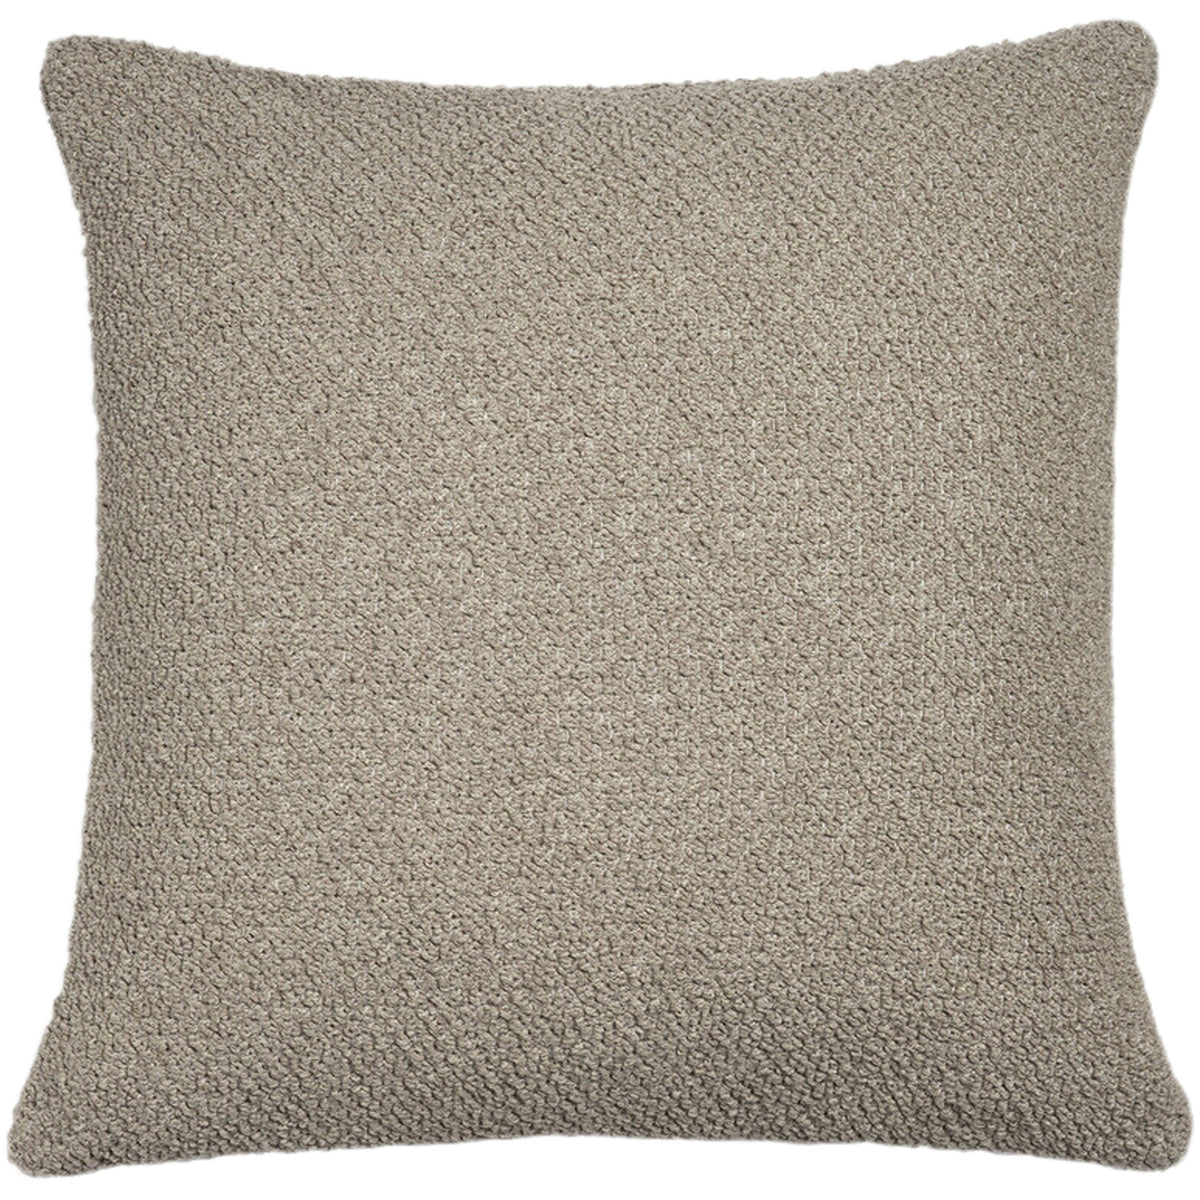 Square Boucle Outdoor Cushion, Set of 2, Oat